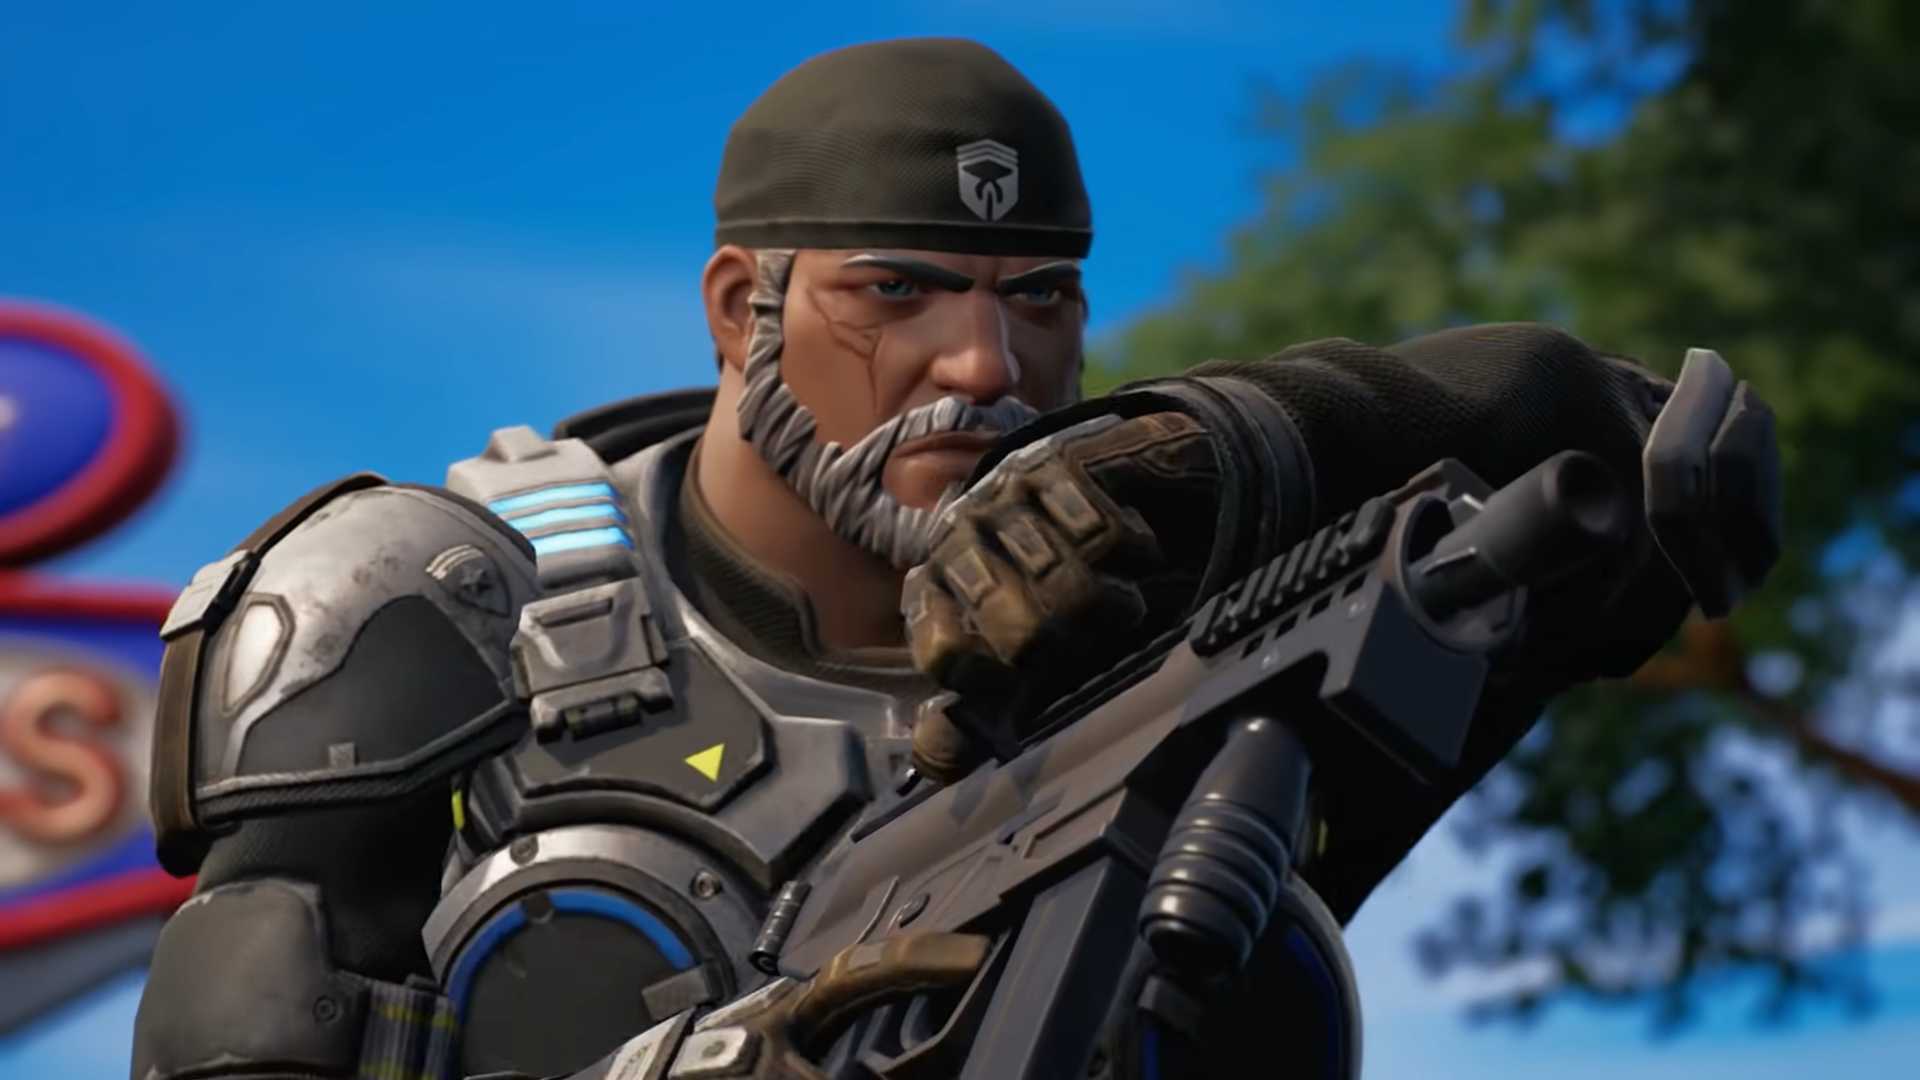  How to get Marcus Fenix and Kait Diaz from Gears of War in Fortnite 